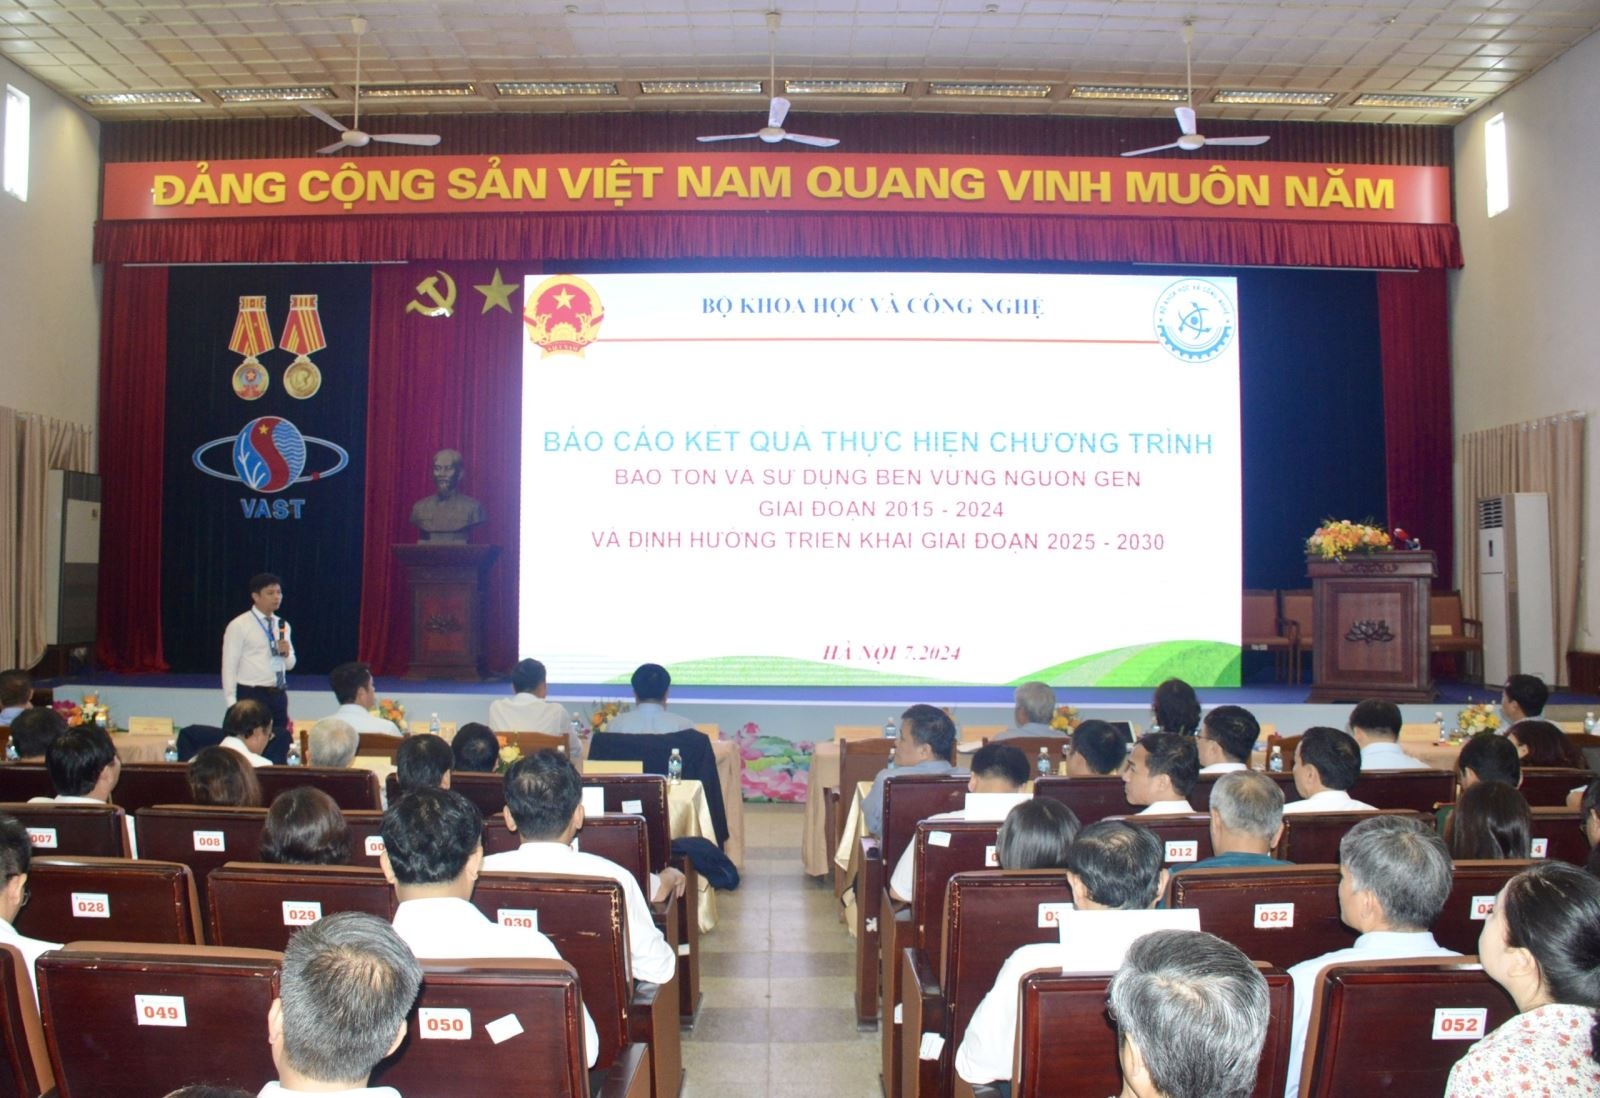 Developing policies sustainably develop genetic resources in Vietnam